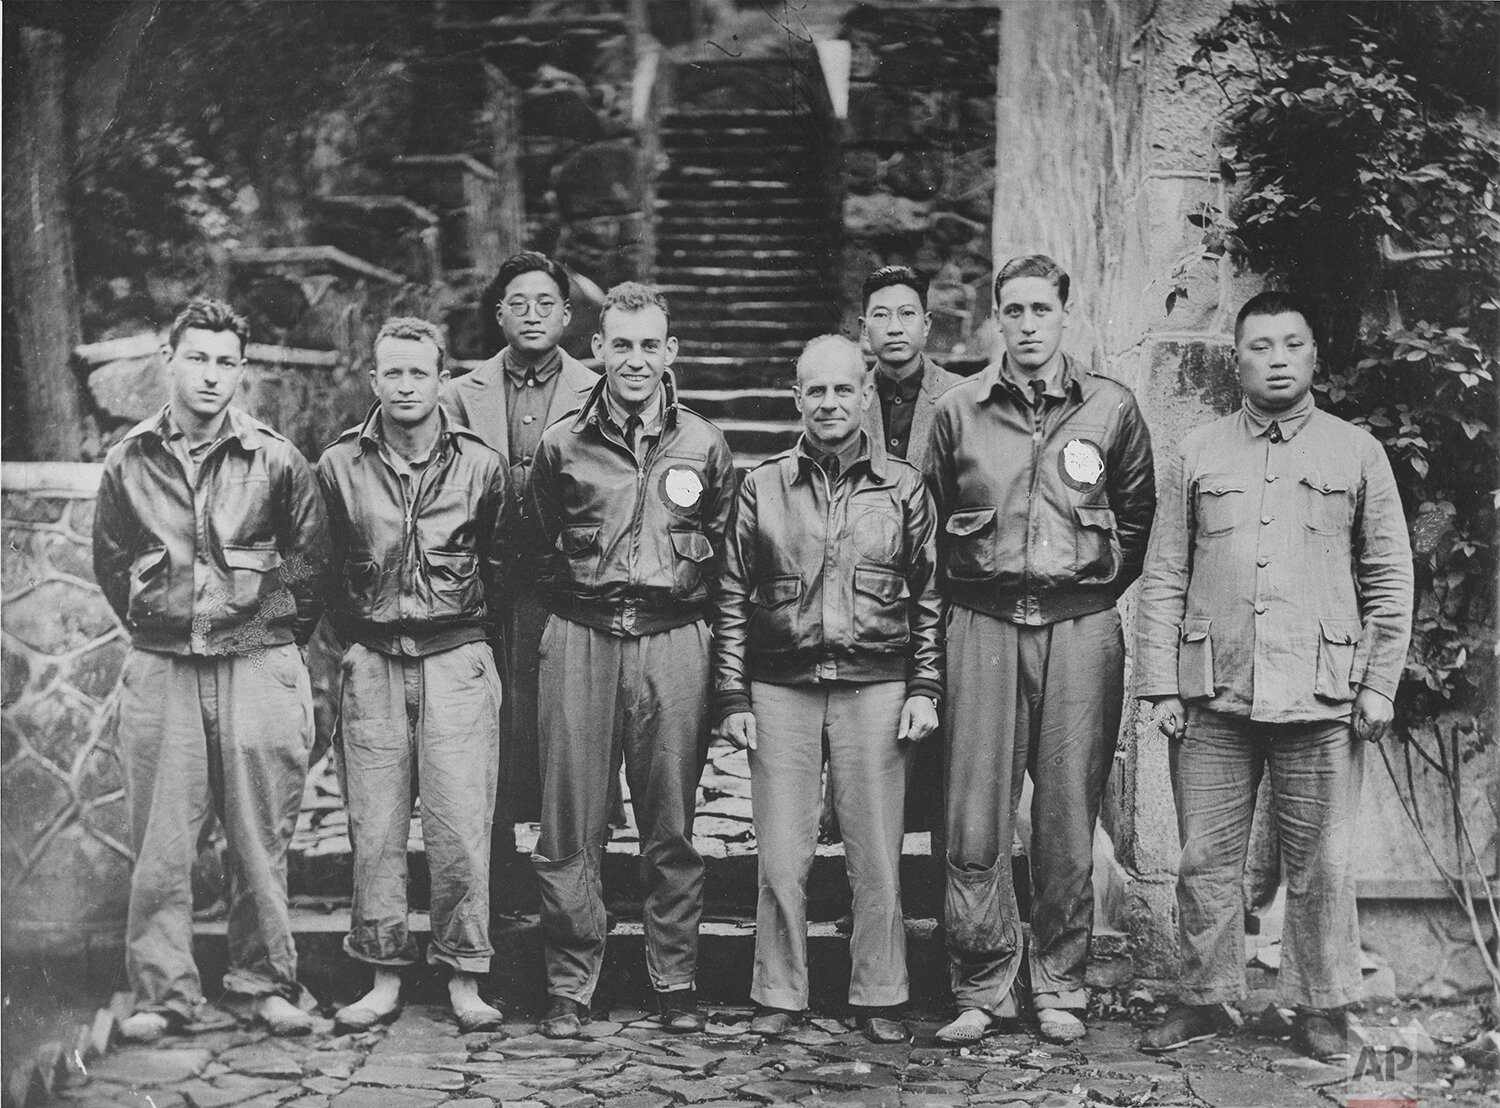  Maj. Gen. James Doolittle, his Tokyo bombing crew, and some Chinese friends are pictured in China after the U.S. airmen bailed out following the raid on Japan, April 18, 1942. From left: Staff Sgt. F.A.  Braemer, bombardier, of Seattle; Sgt. P.J. Le